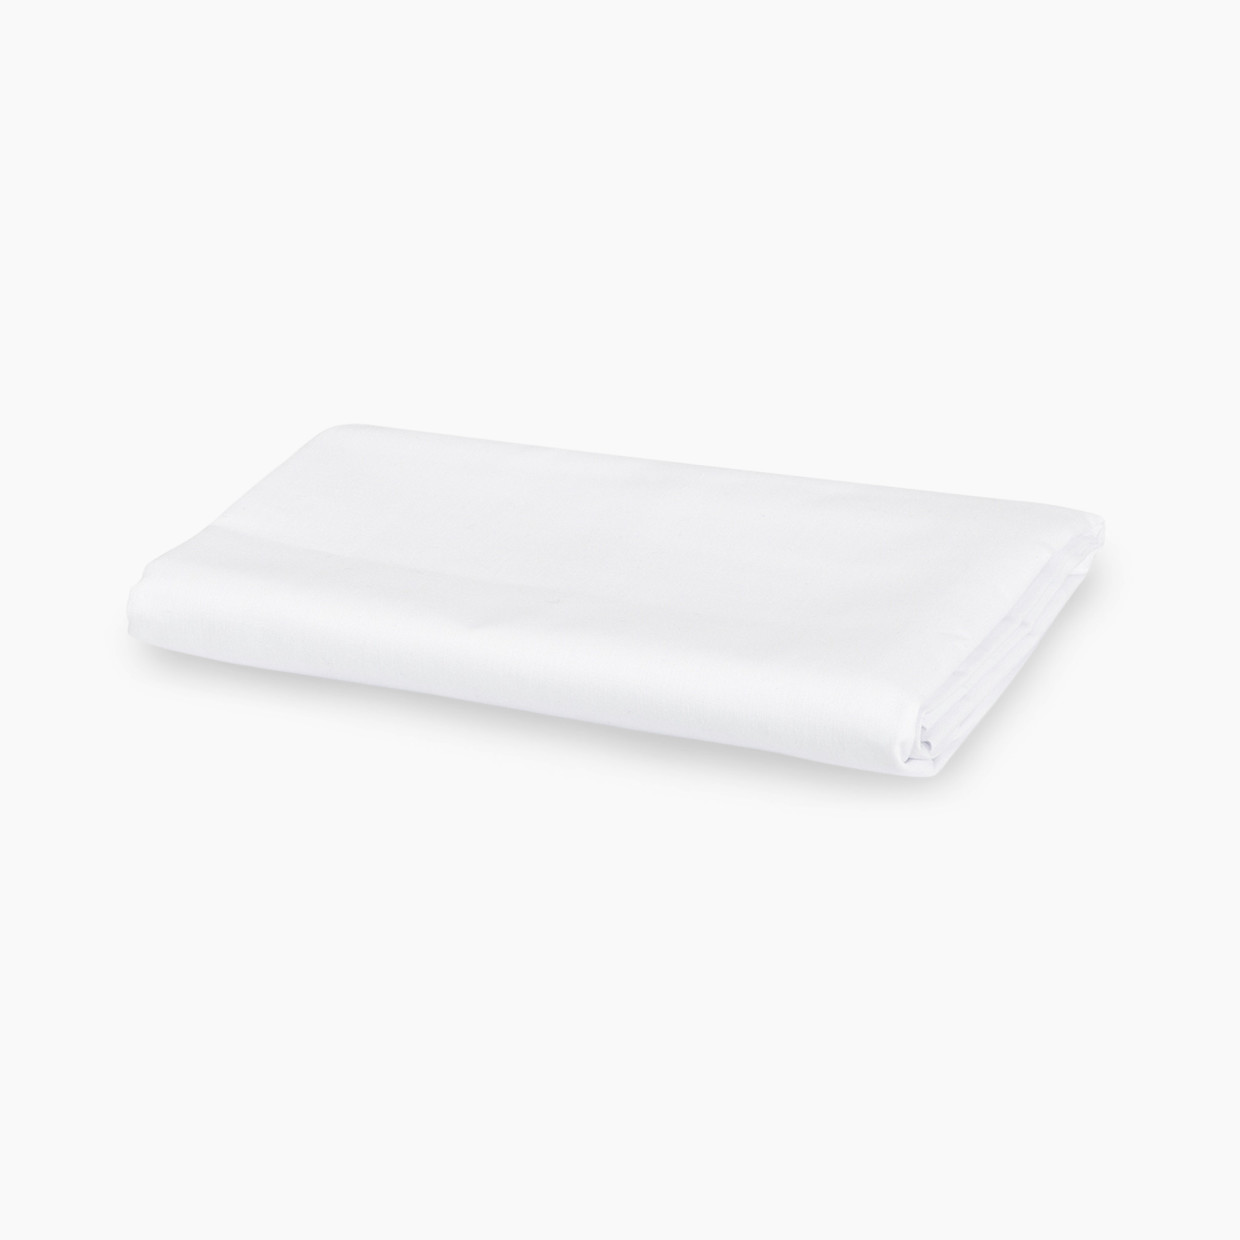 Graco Pack 'n Play Playard Fitted Sheet - White.